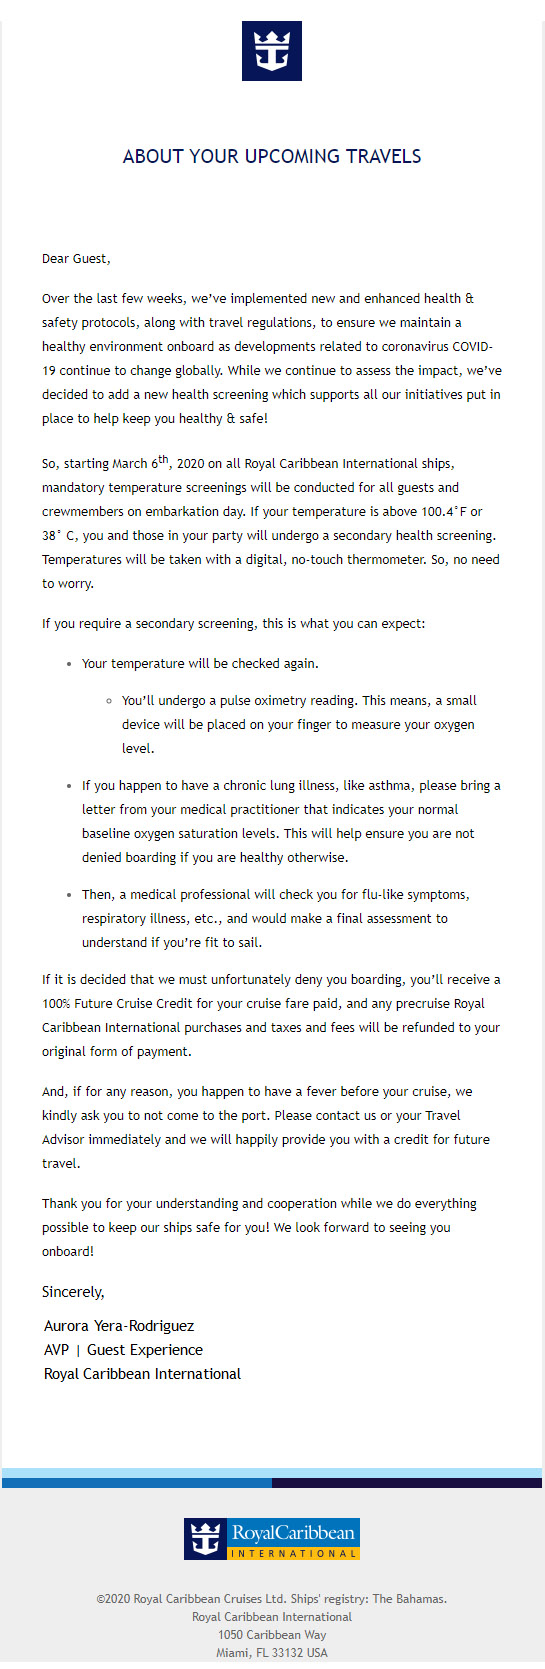 Letter sent to guests to inform them of mandatory temperature screenings